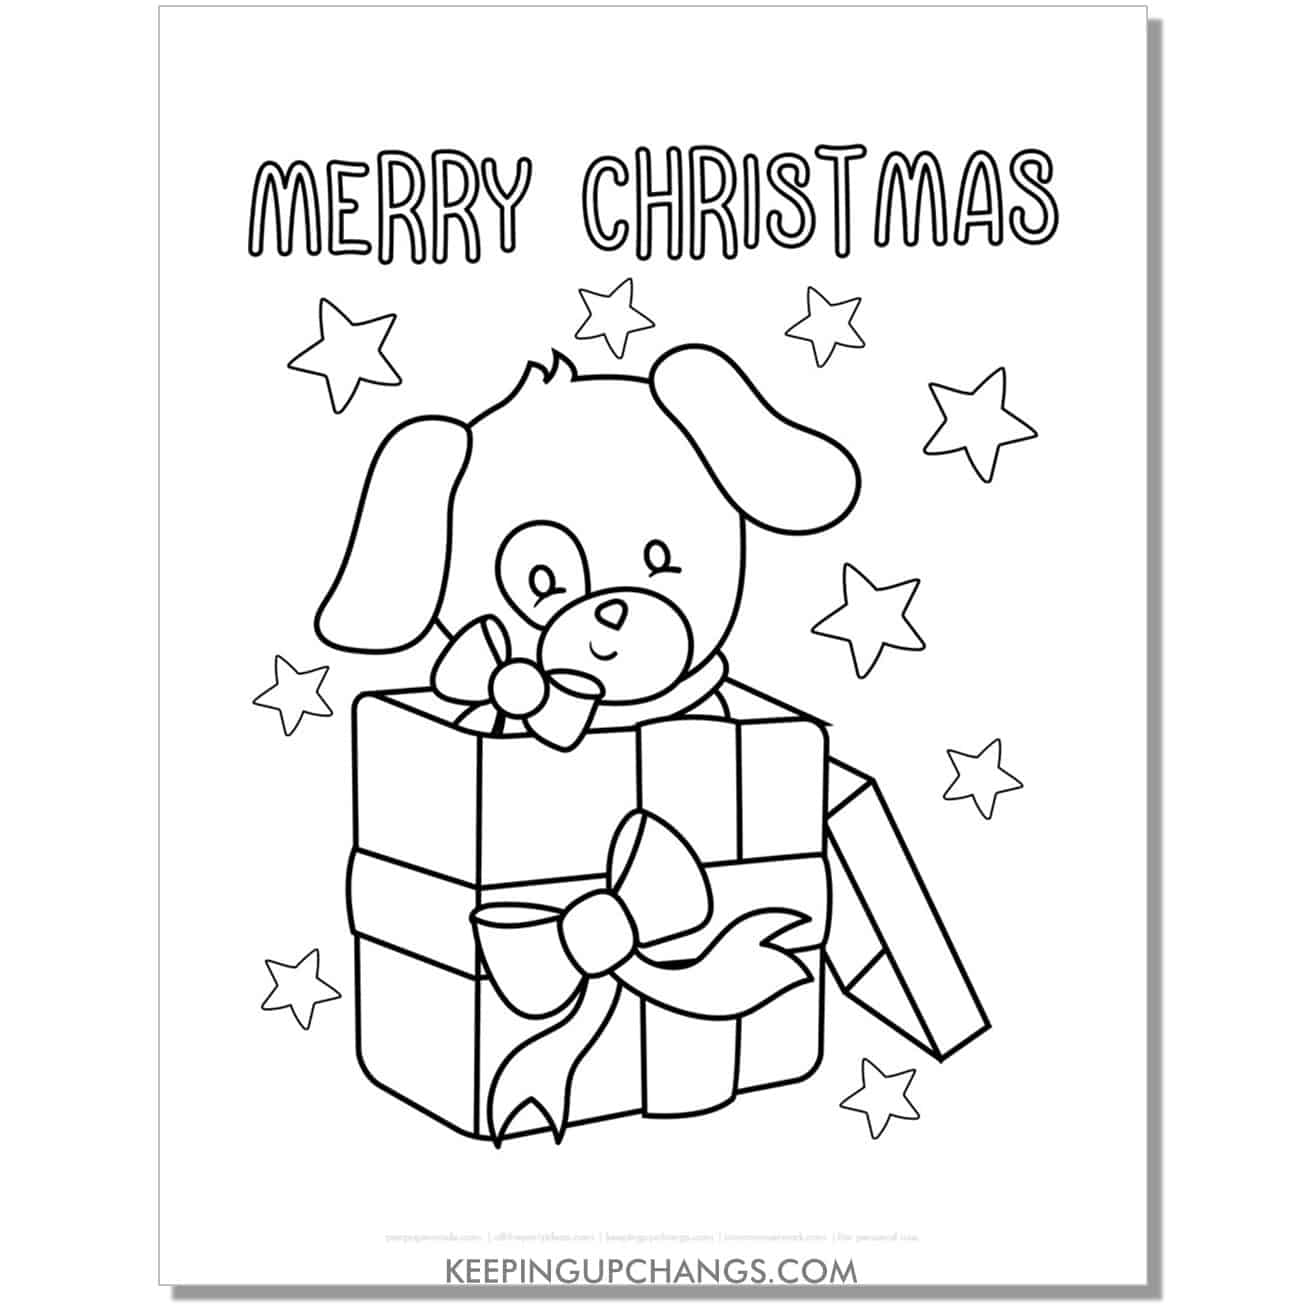 free cute dog in present, gift merry christmas dog coloring page.